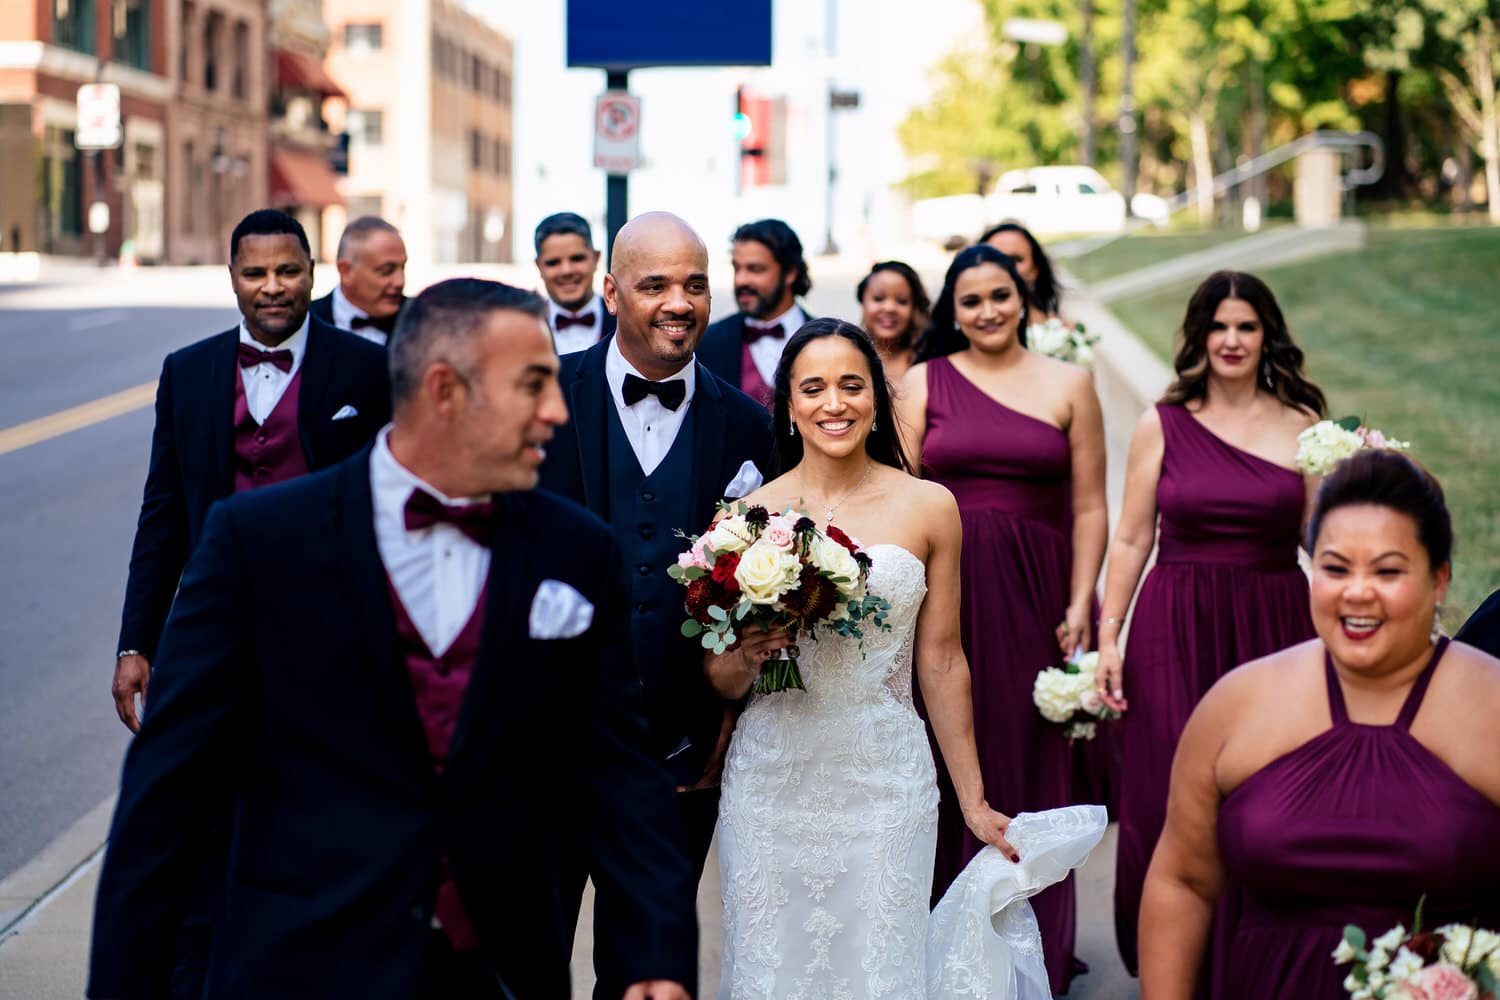 A candid, colorful picture of a bride, groom, and their wedding party walking down a city street in Kansas City on their summer wedding day. 